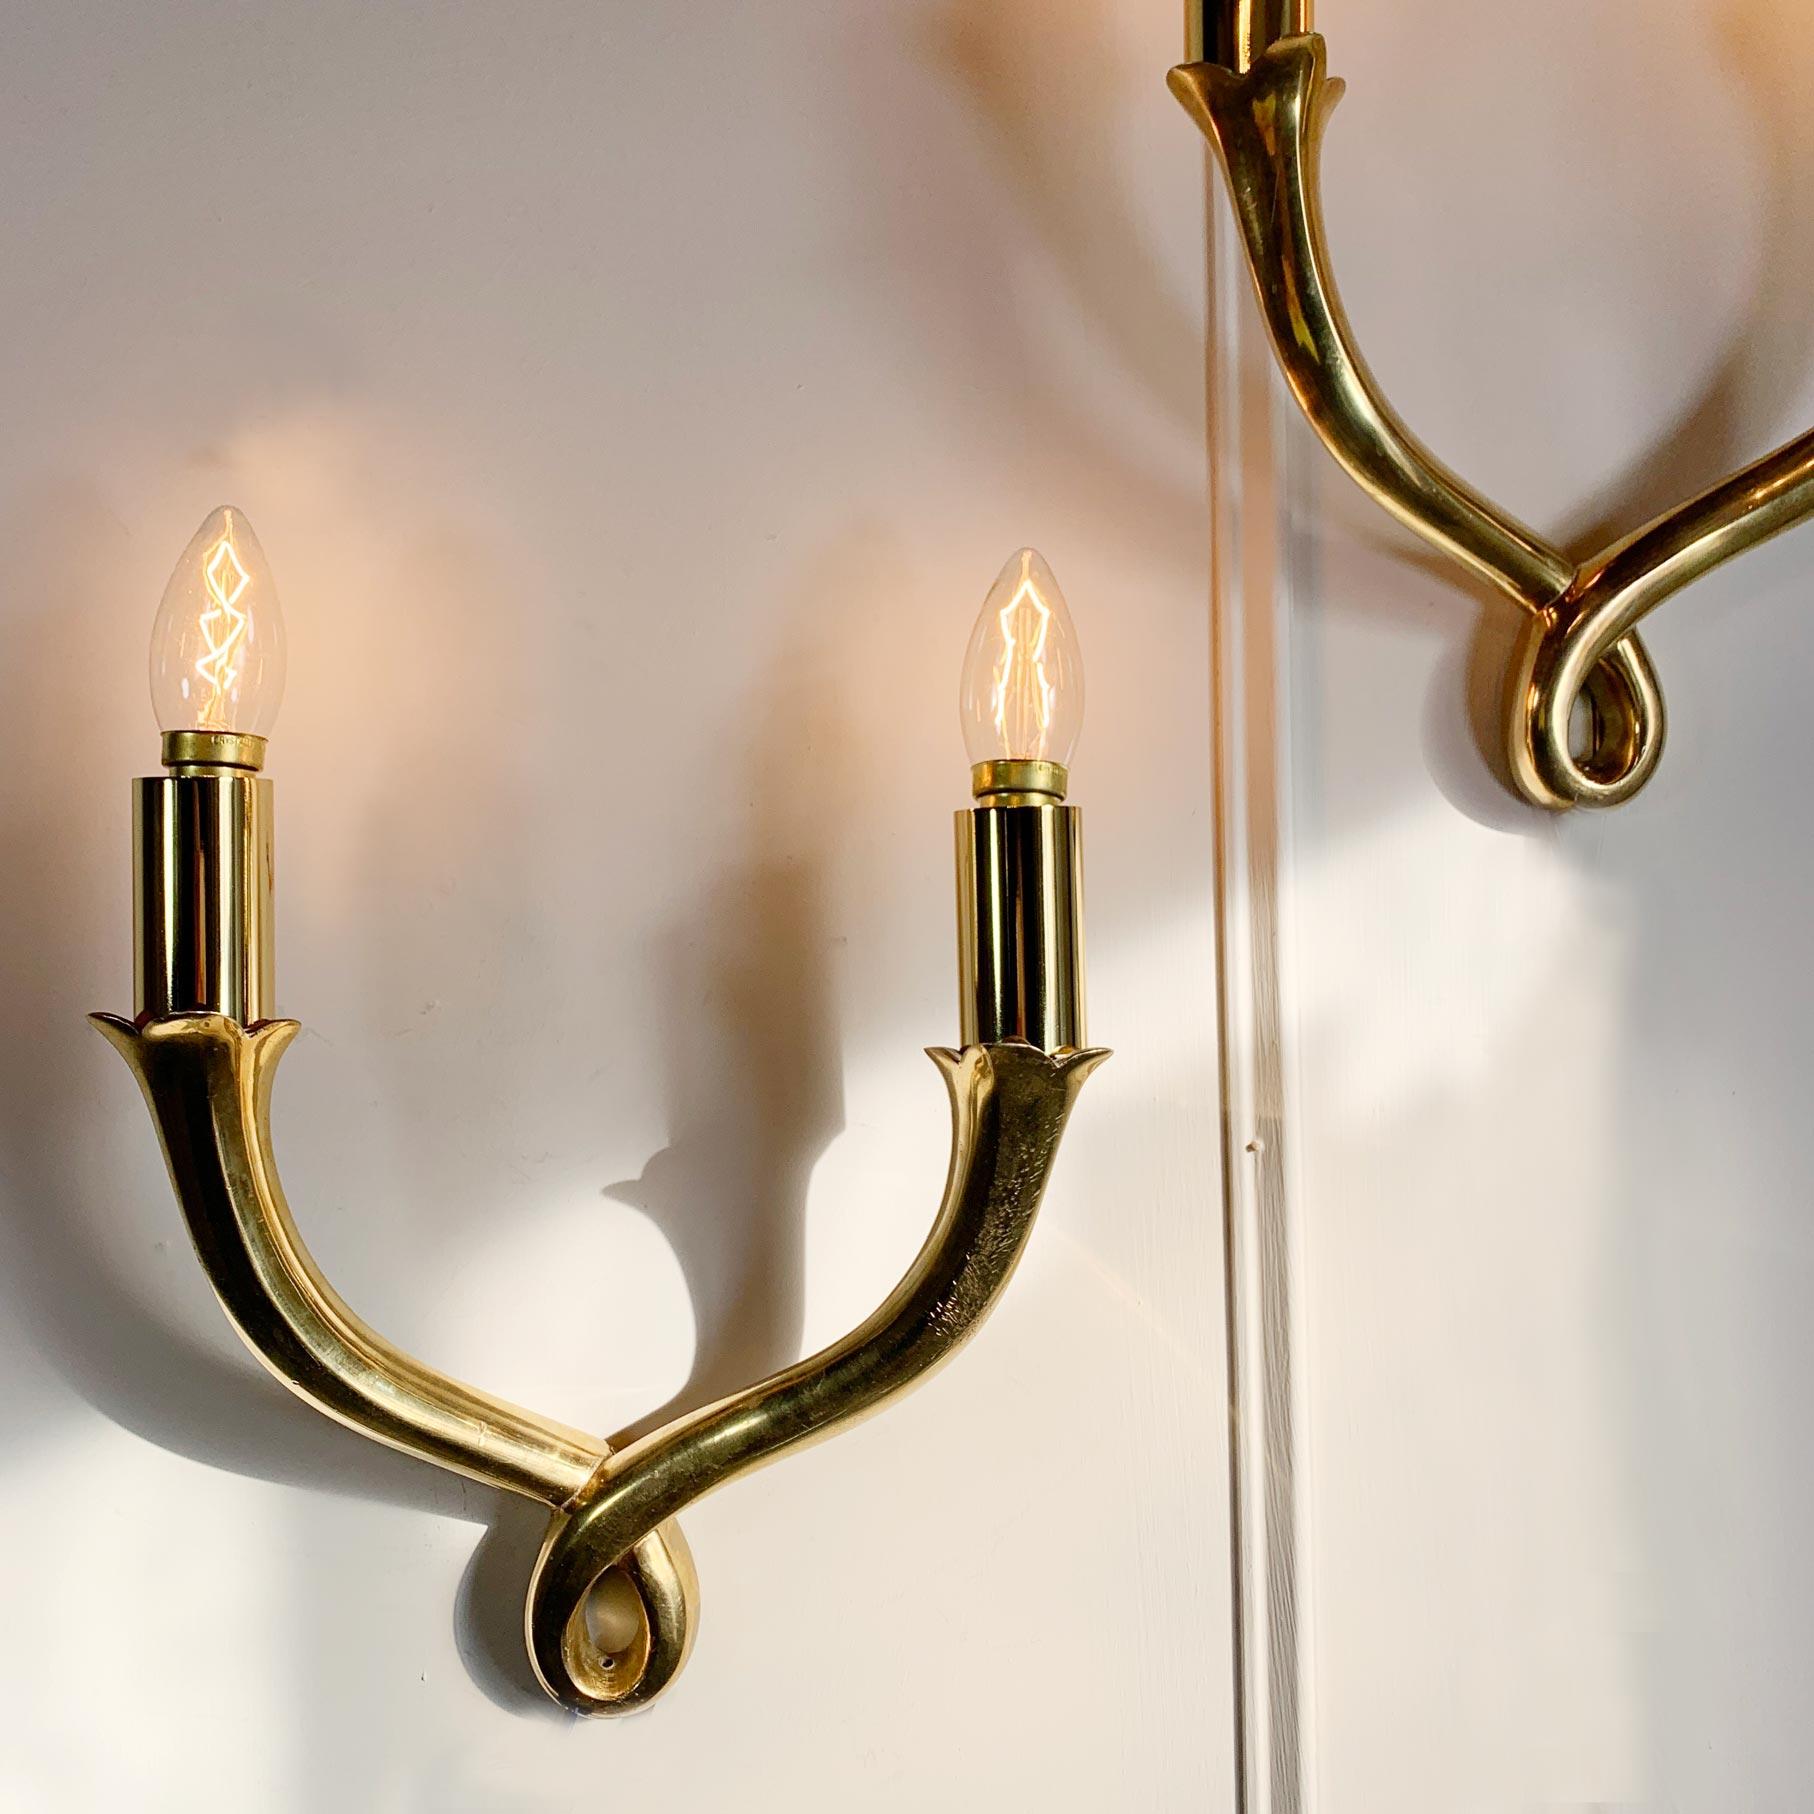 Hollywood Regency Pair of Polished Bronze Wall Lights by Riccardo Scarpa Fully Signed